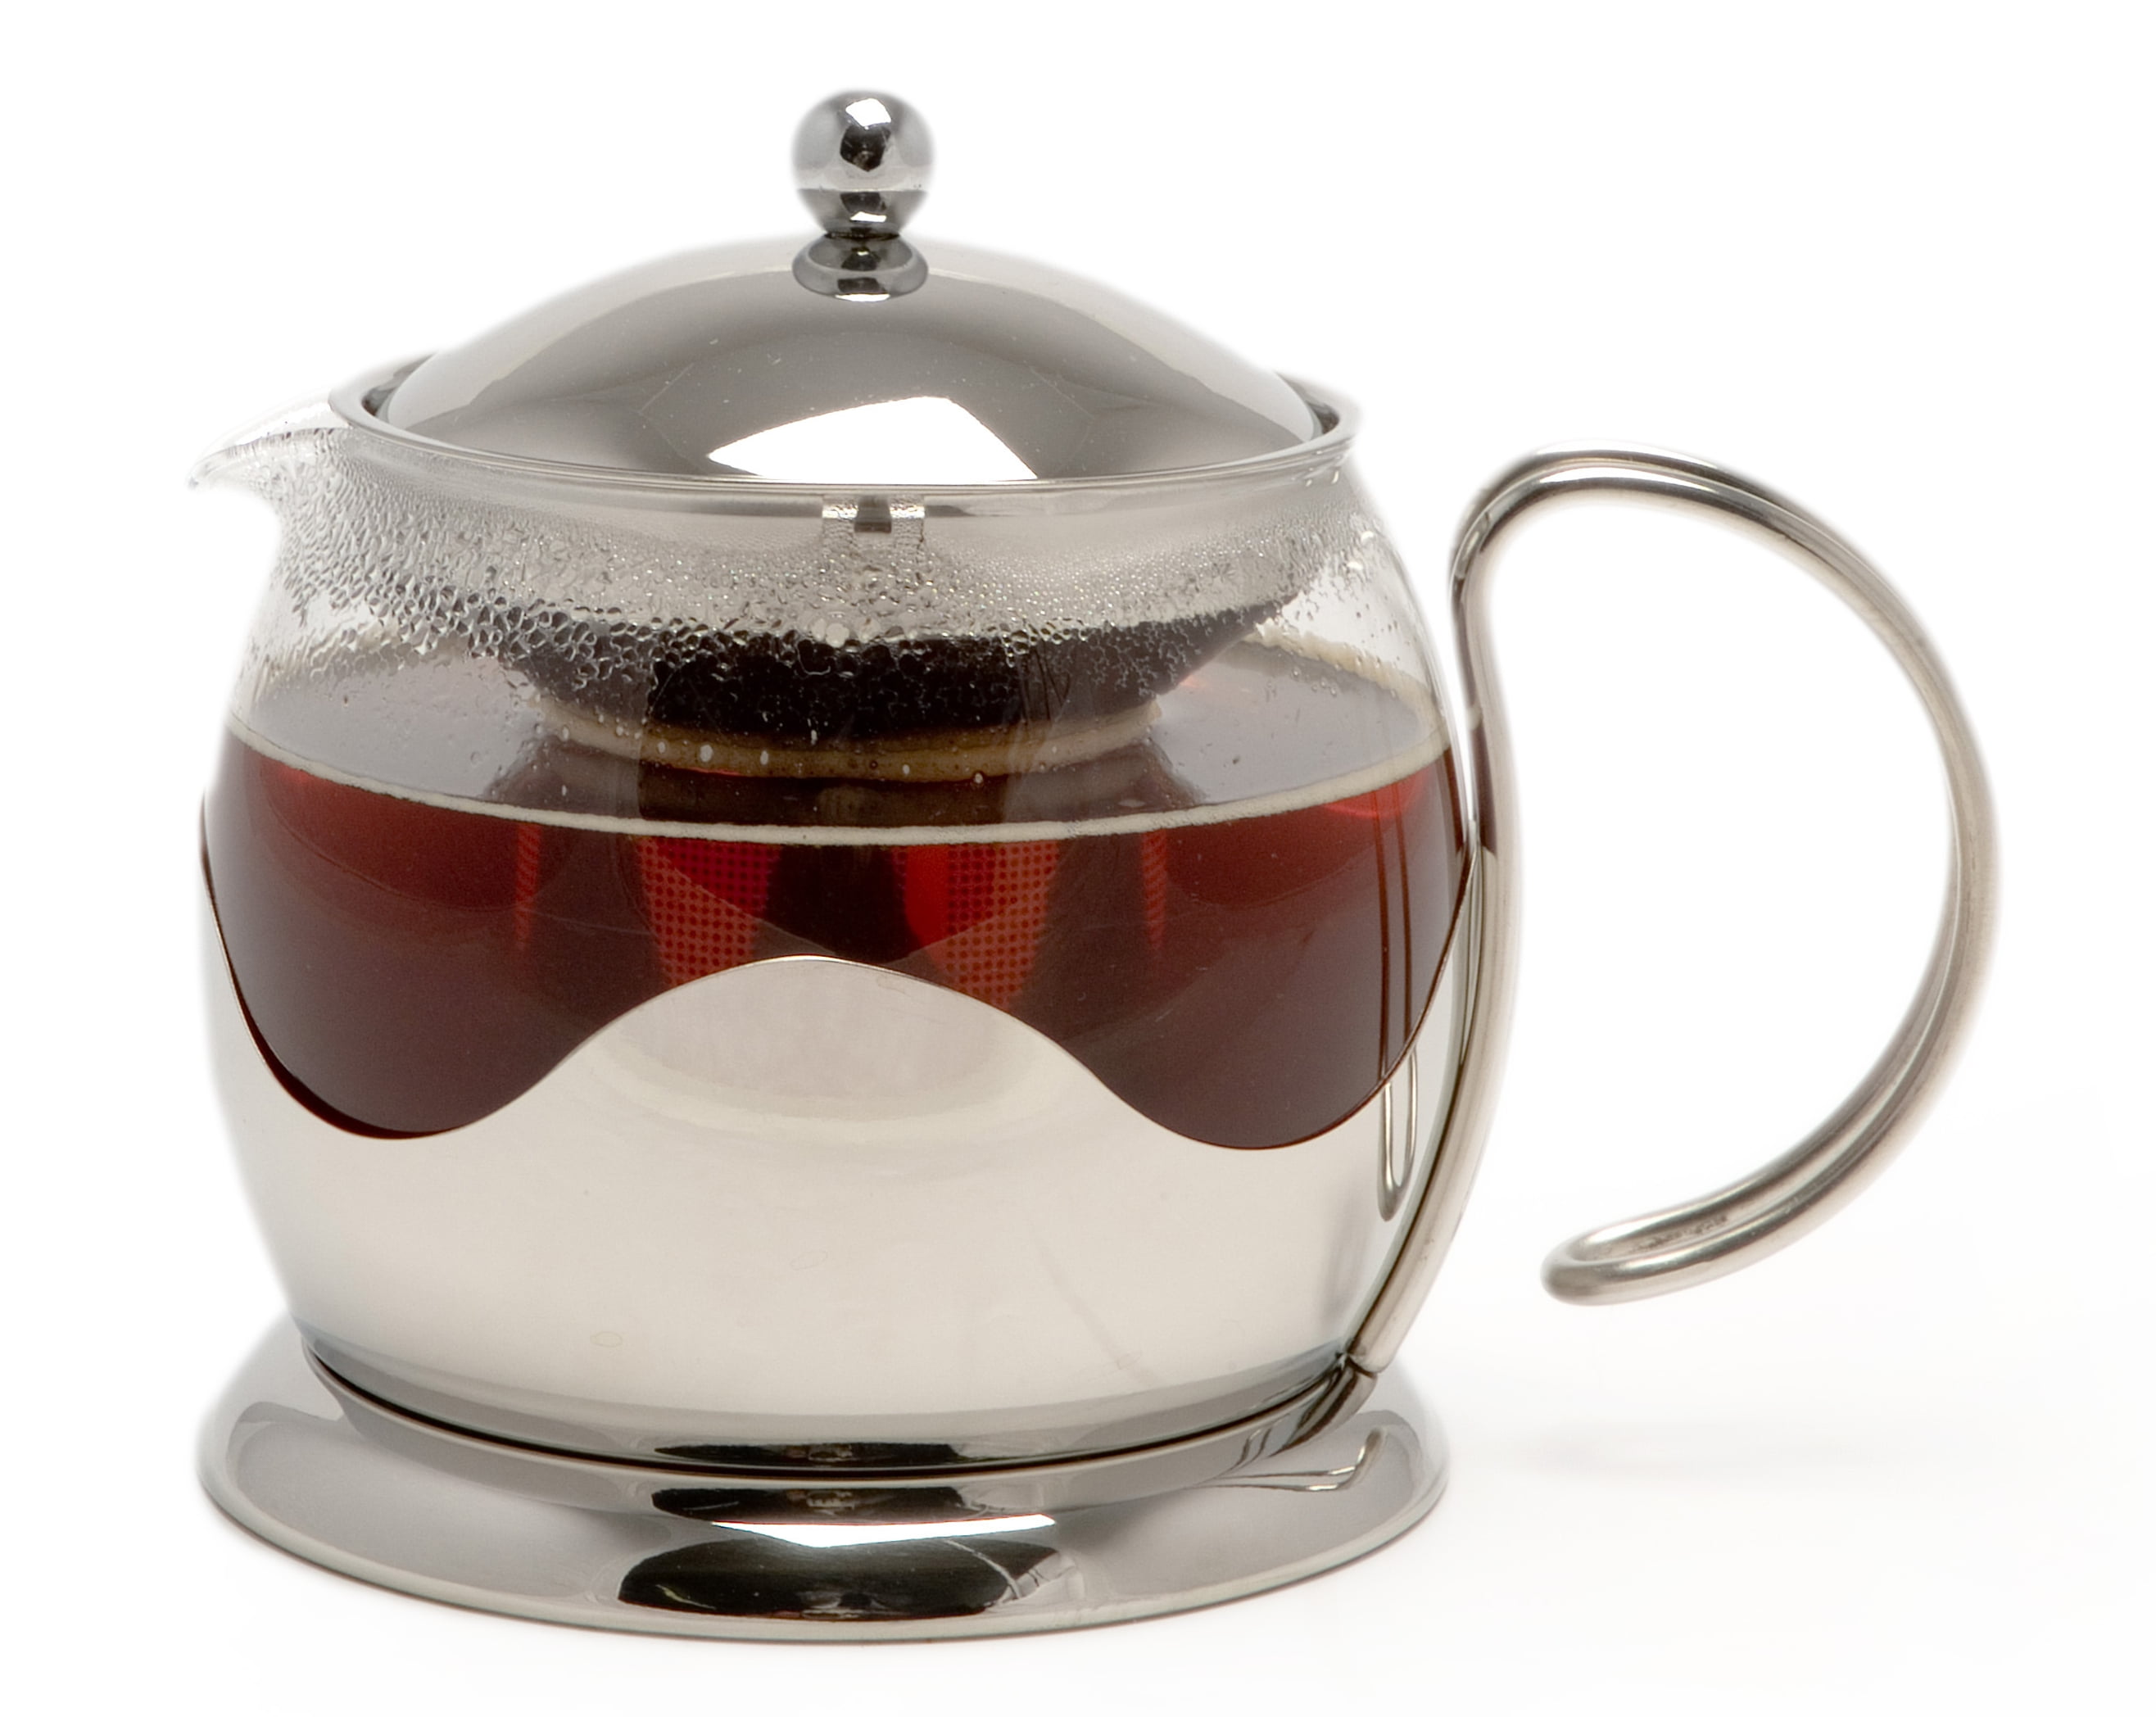 Leclaire Stainless Steel Teapot